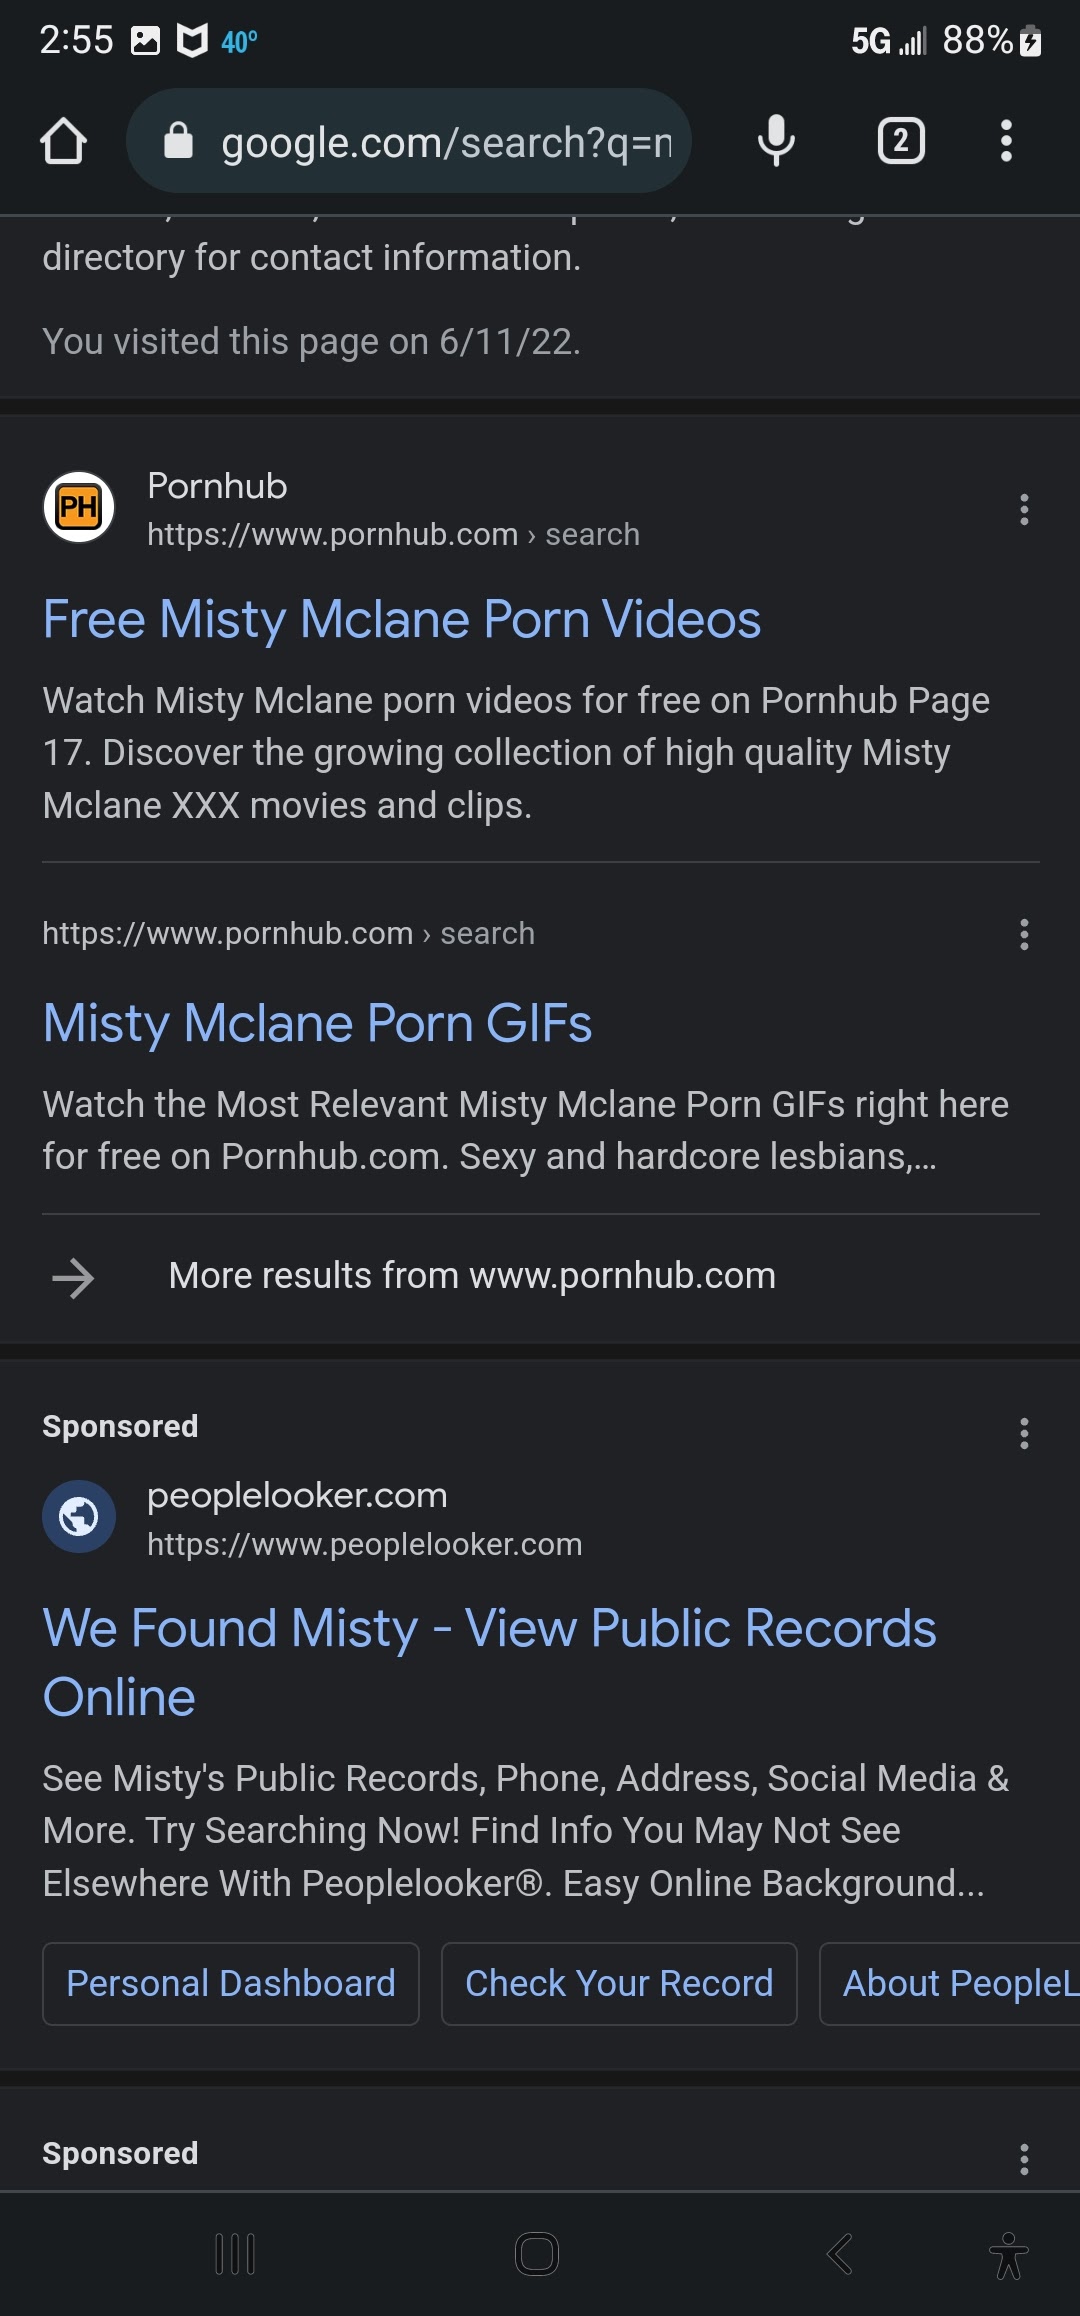 Xxx Video Google Search - My name pulls me up on porn sites that I'm not on - Google Search Community